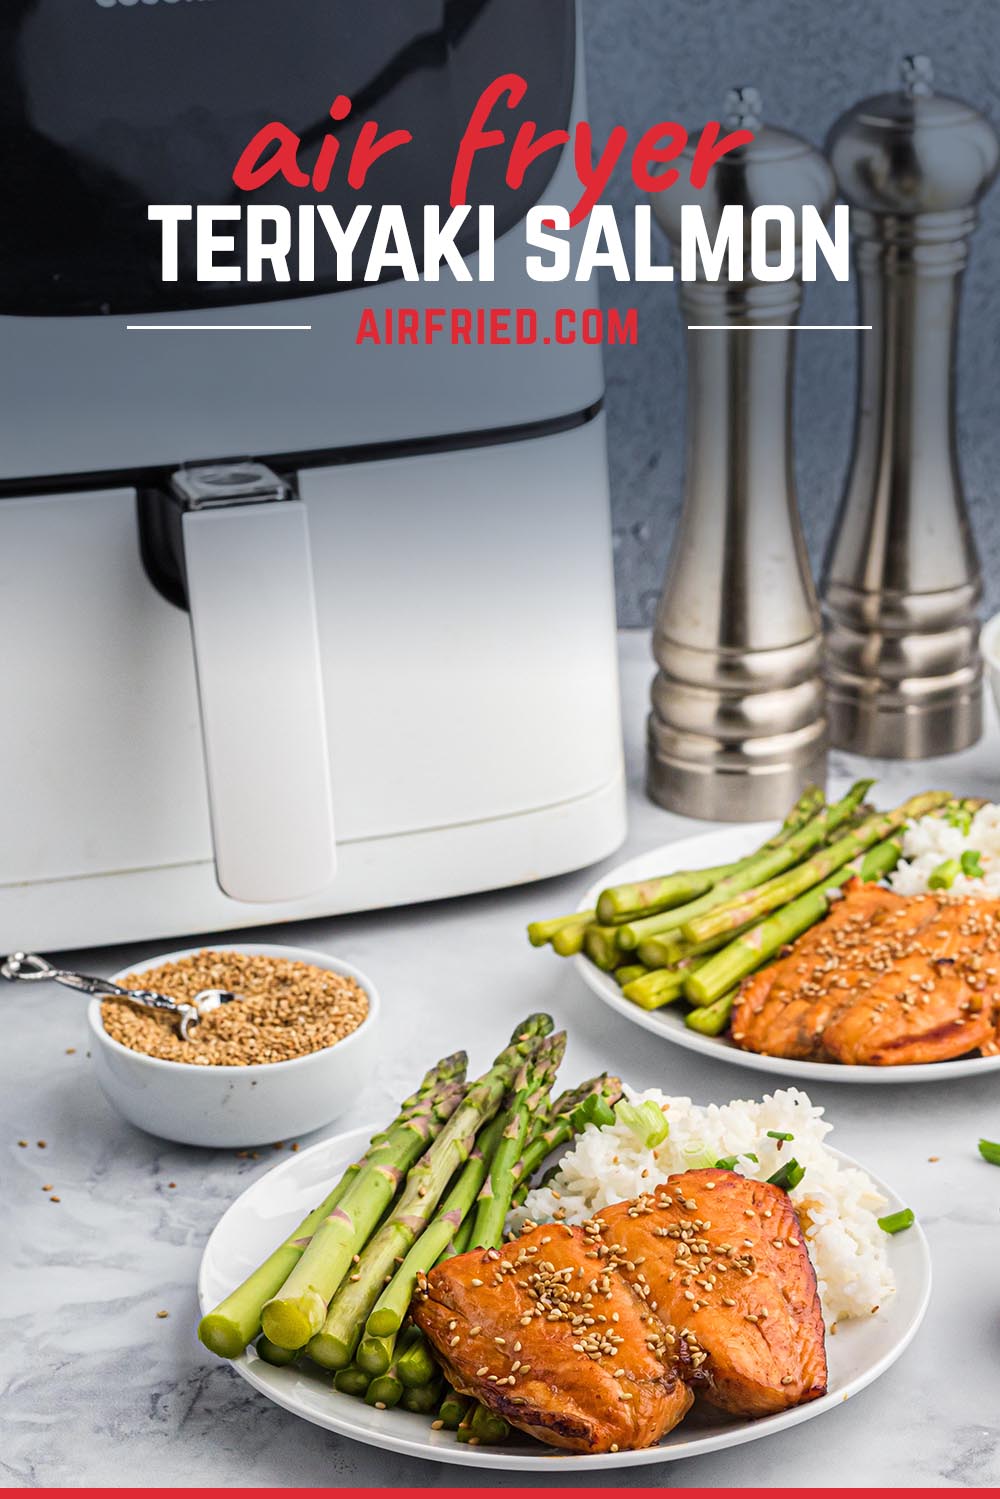 A dinner plate with salmon and asparagus in front of an air fryer.